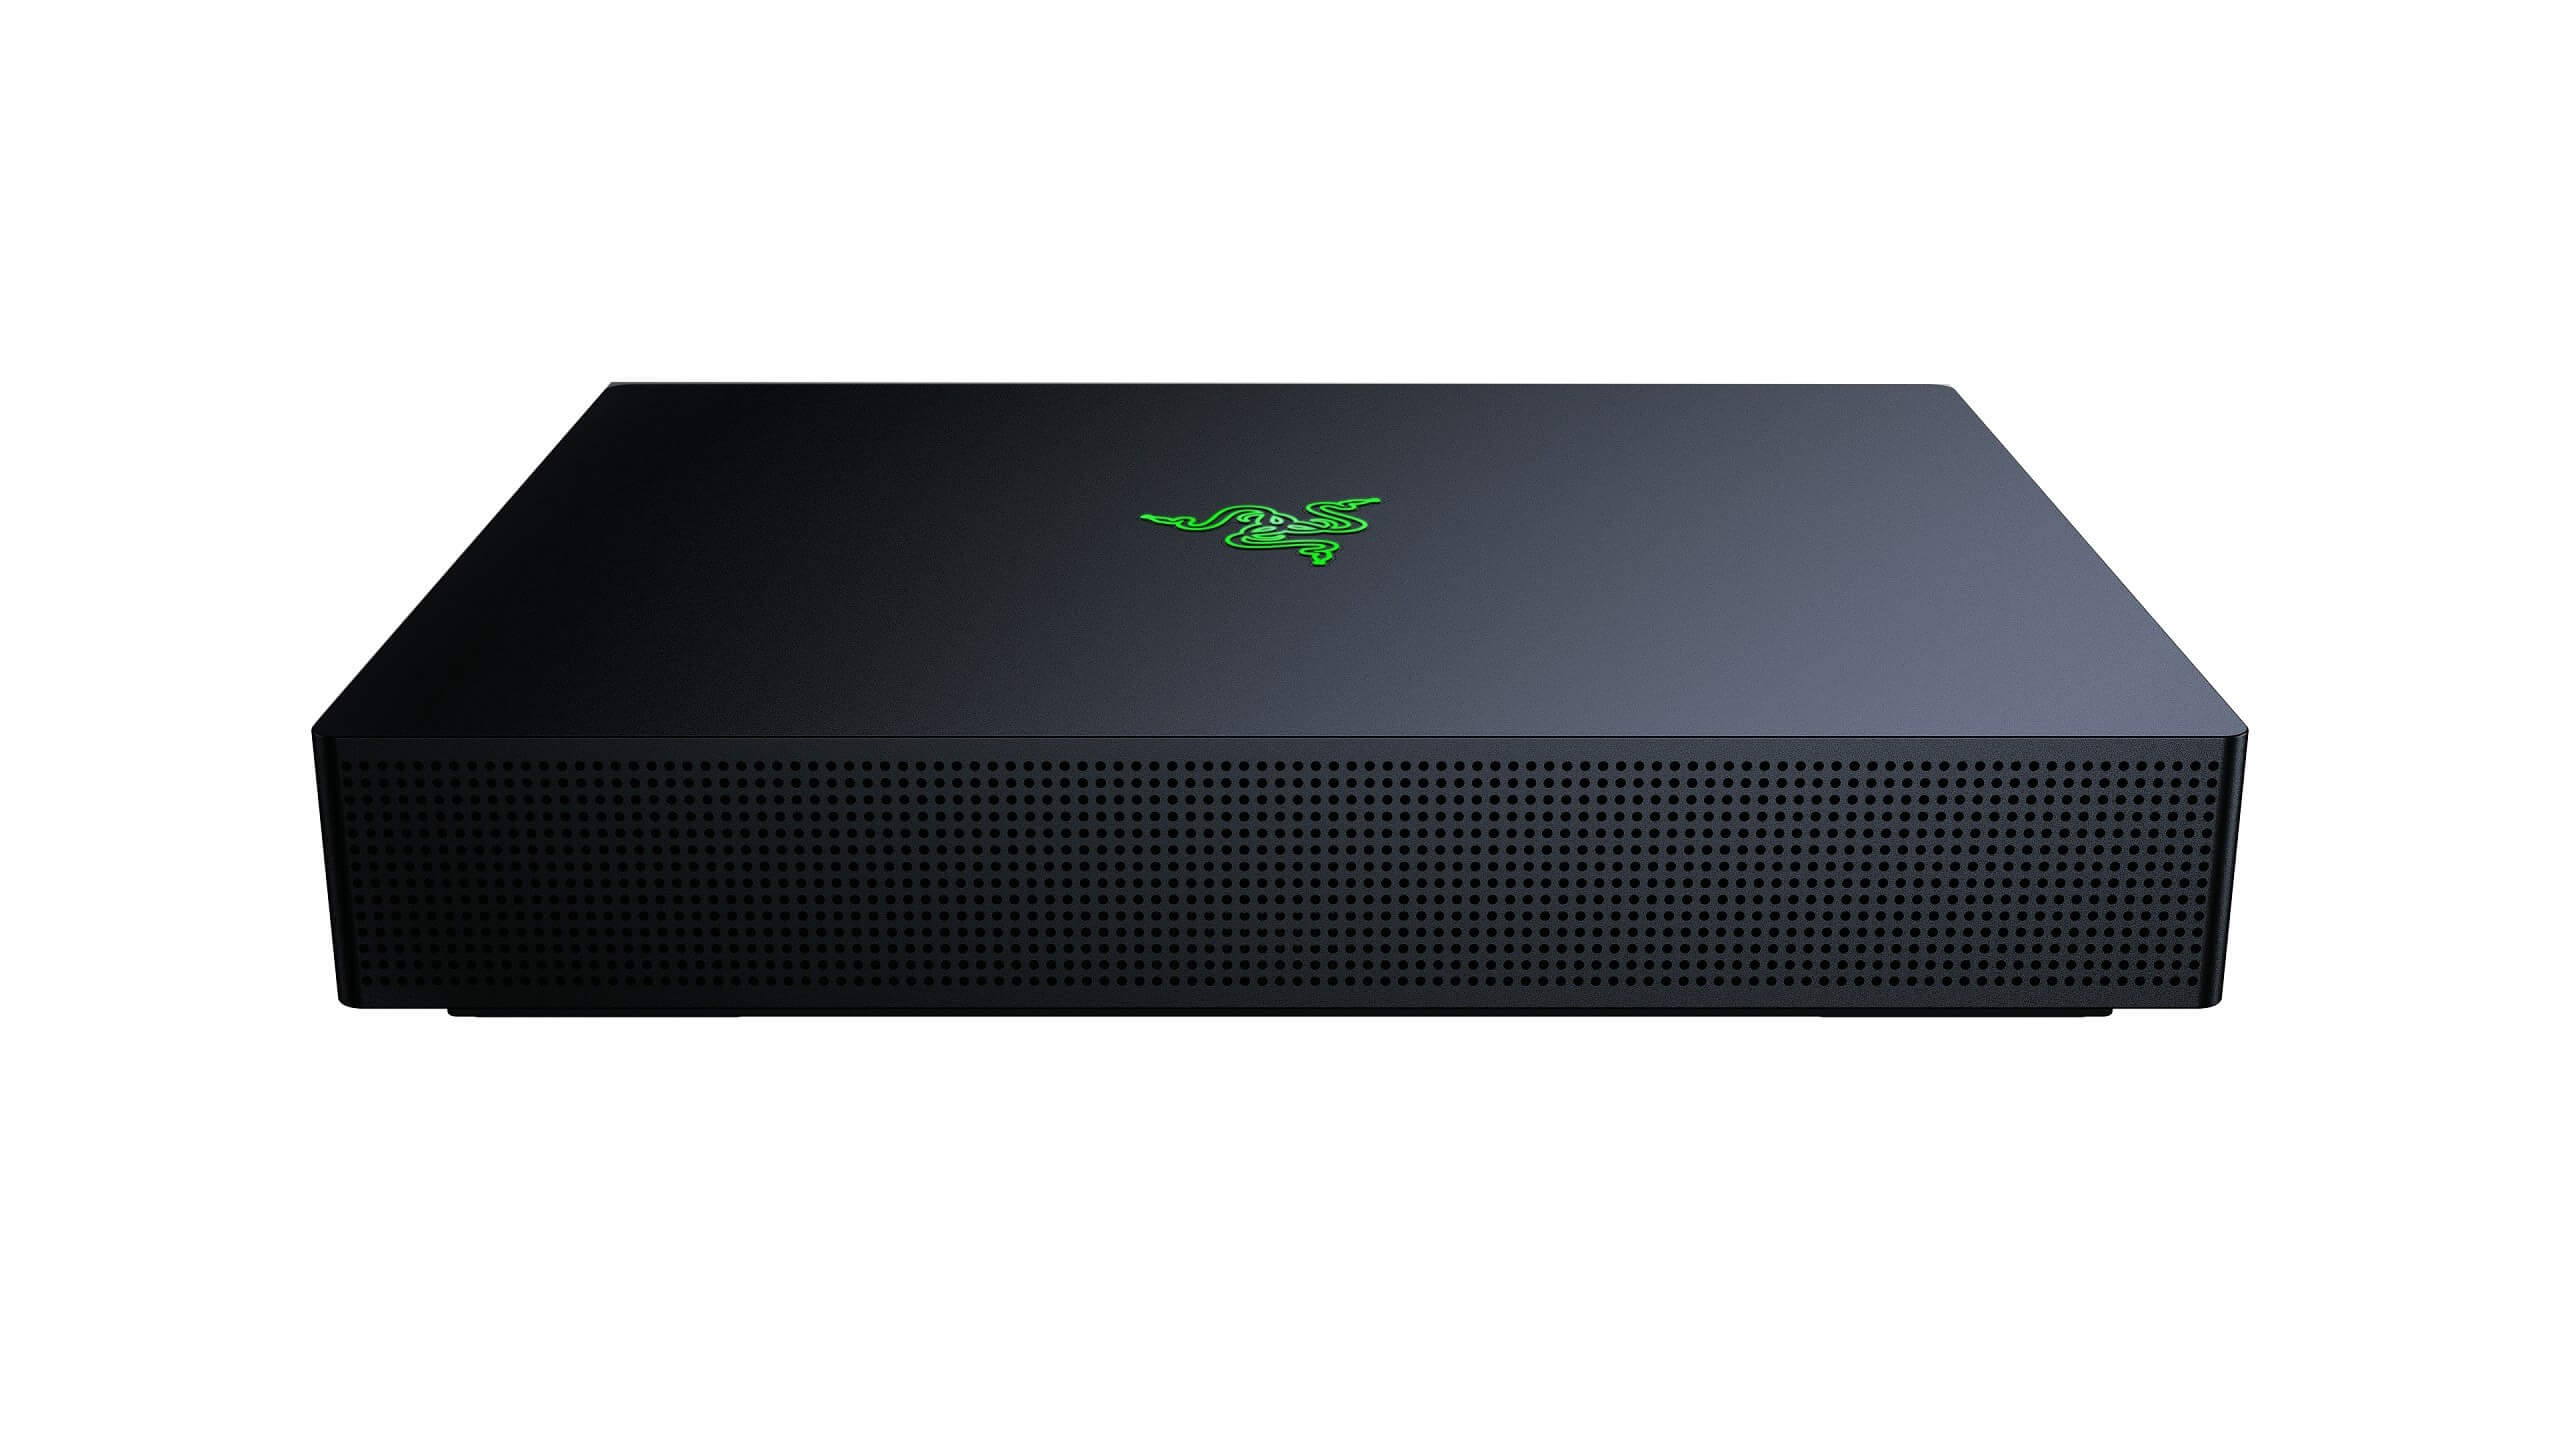 Razer enters router market with the gaming-focused Sila